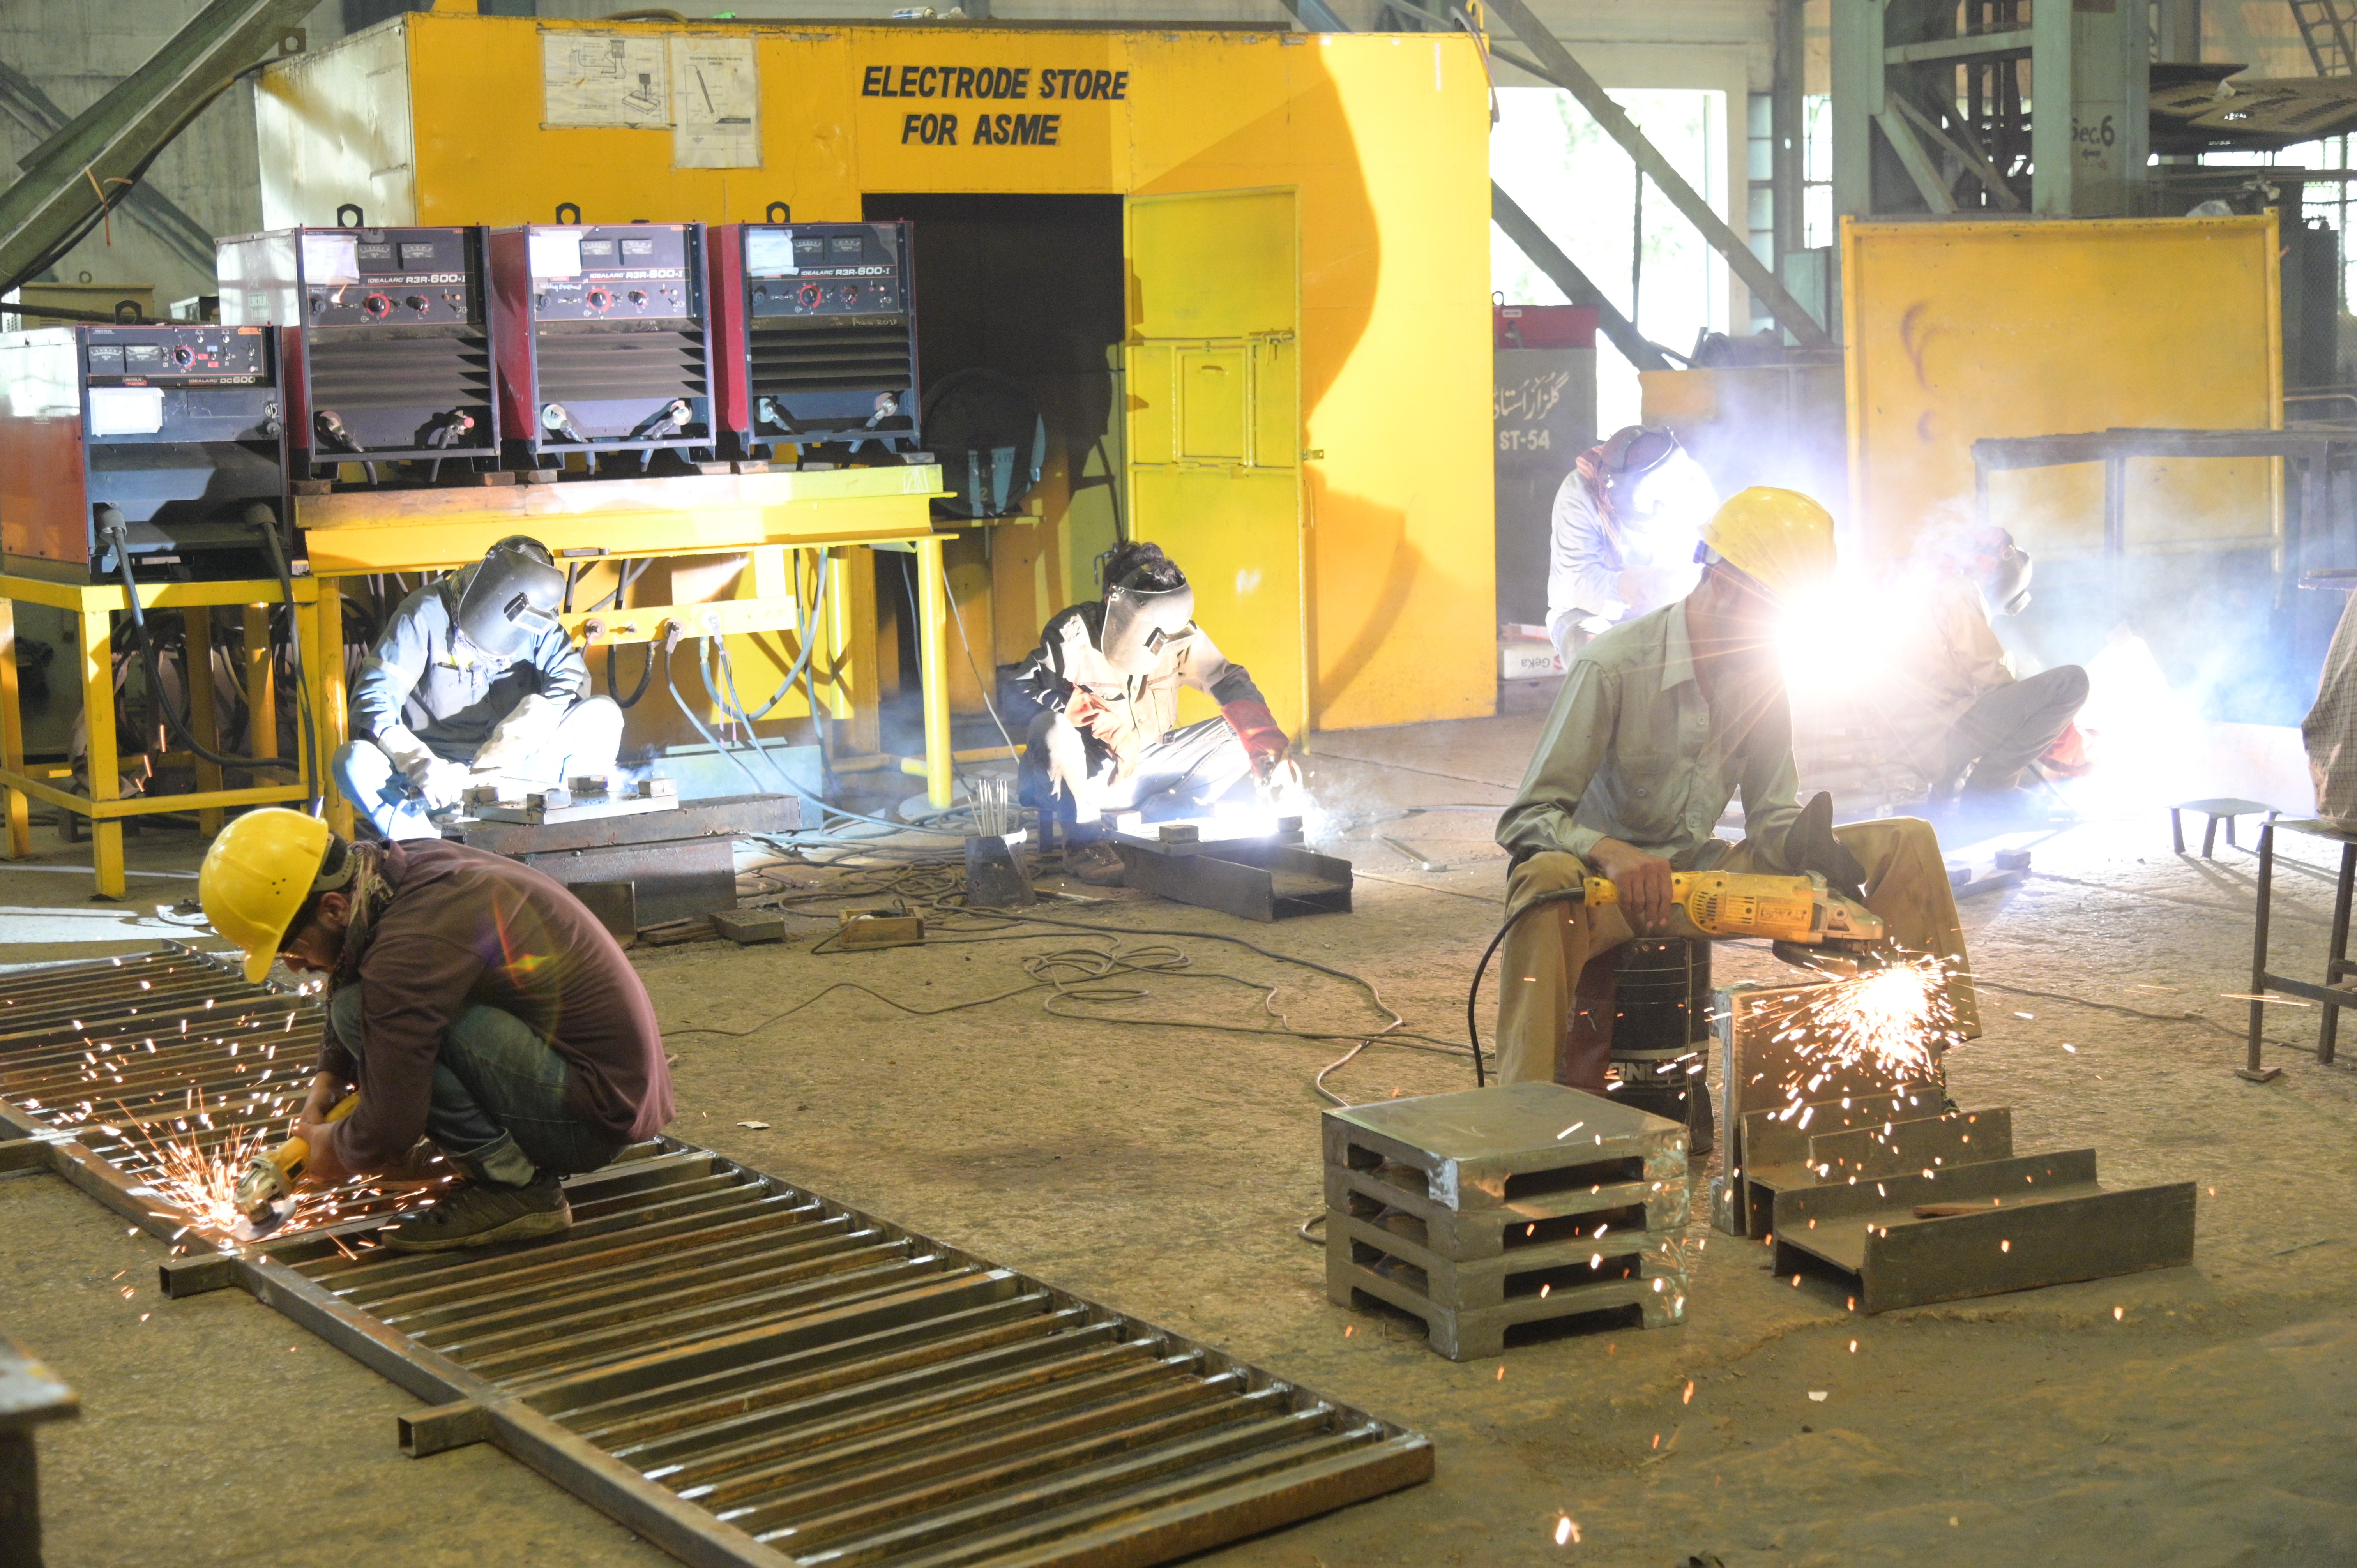 workers busy in cutting and welding the iron objects